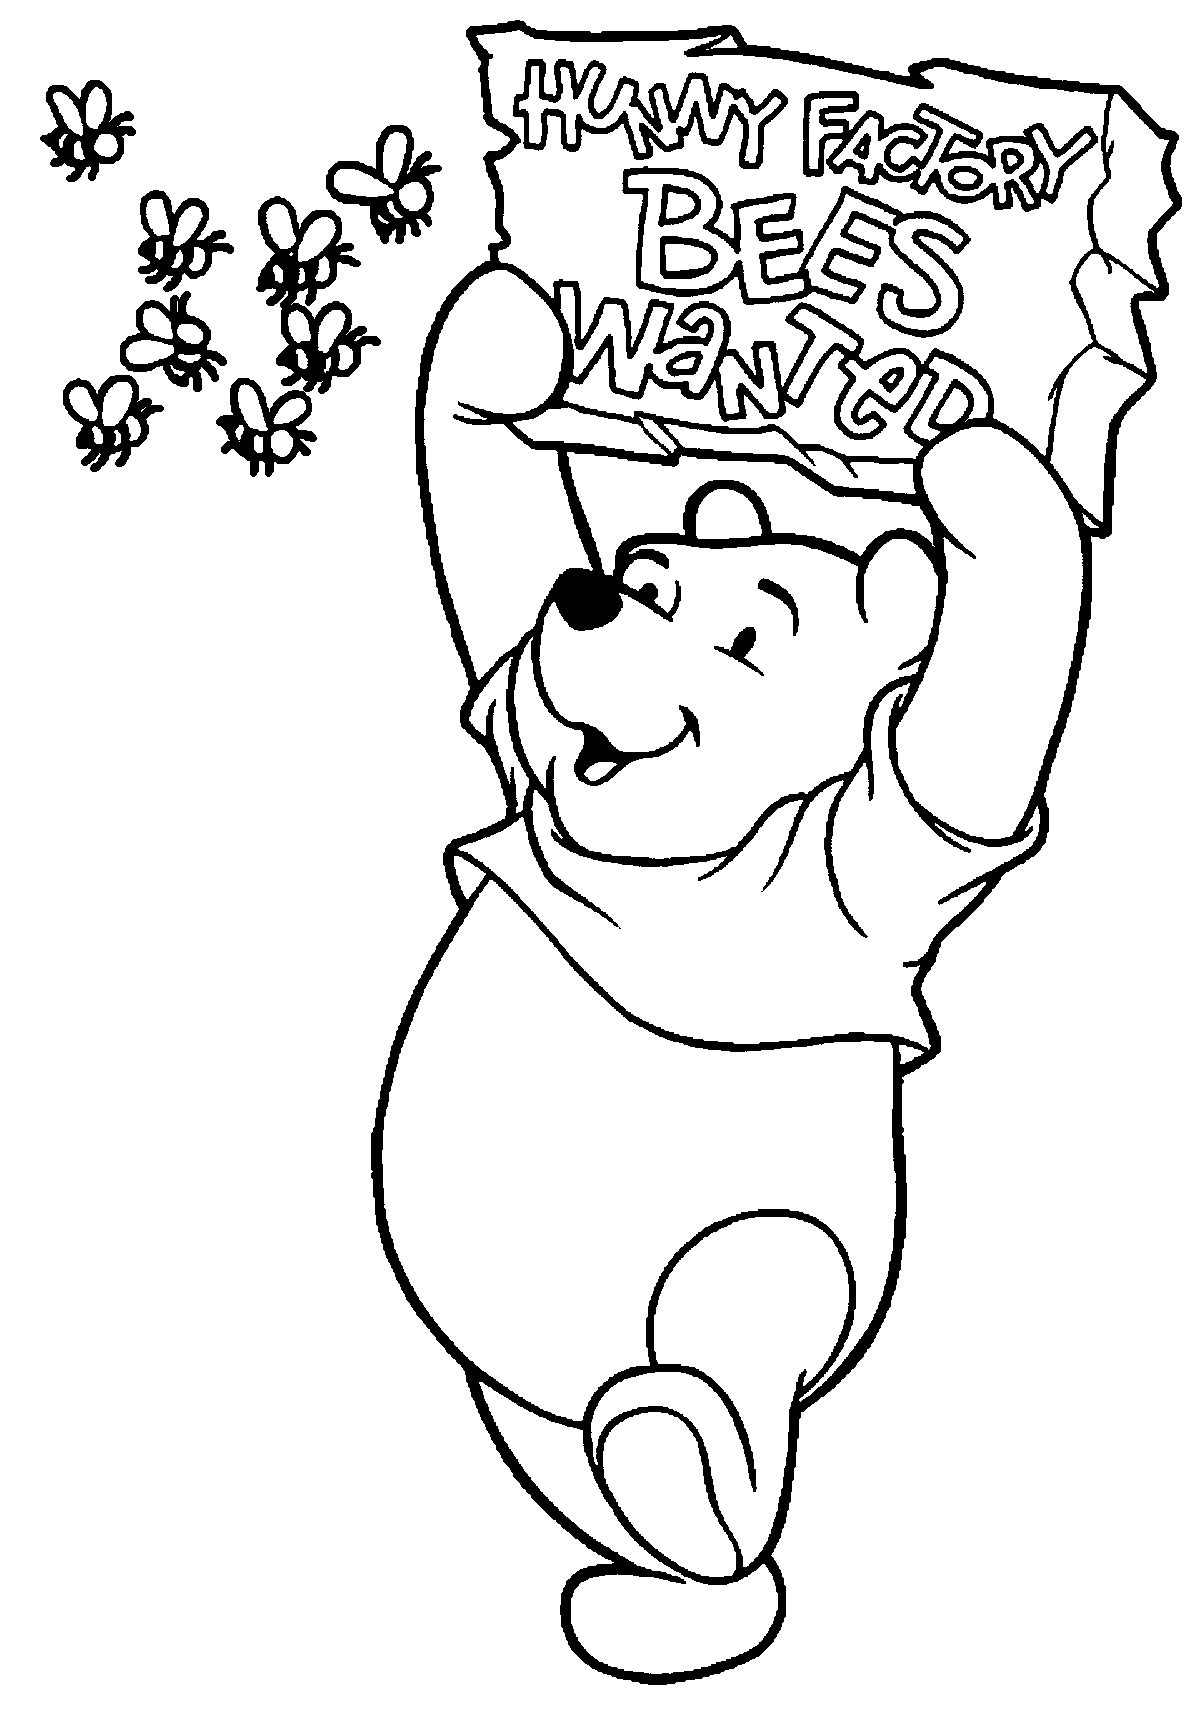 Funny Winnie The Pooh Coloring Pages